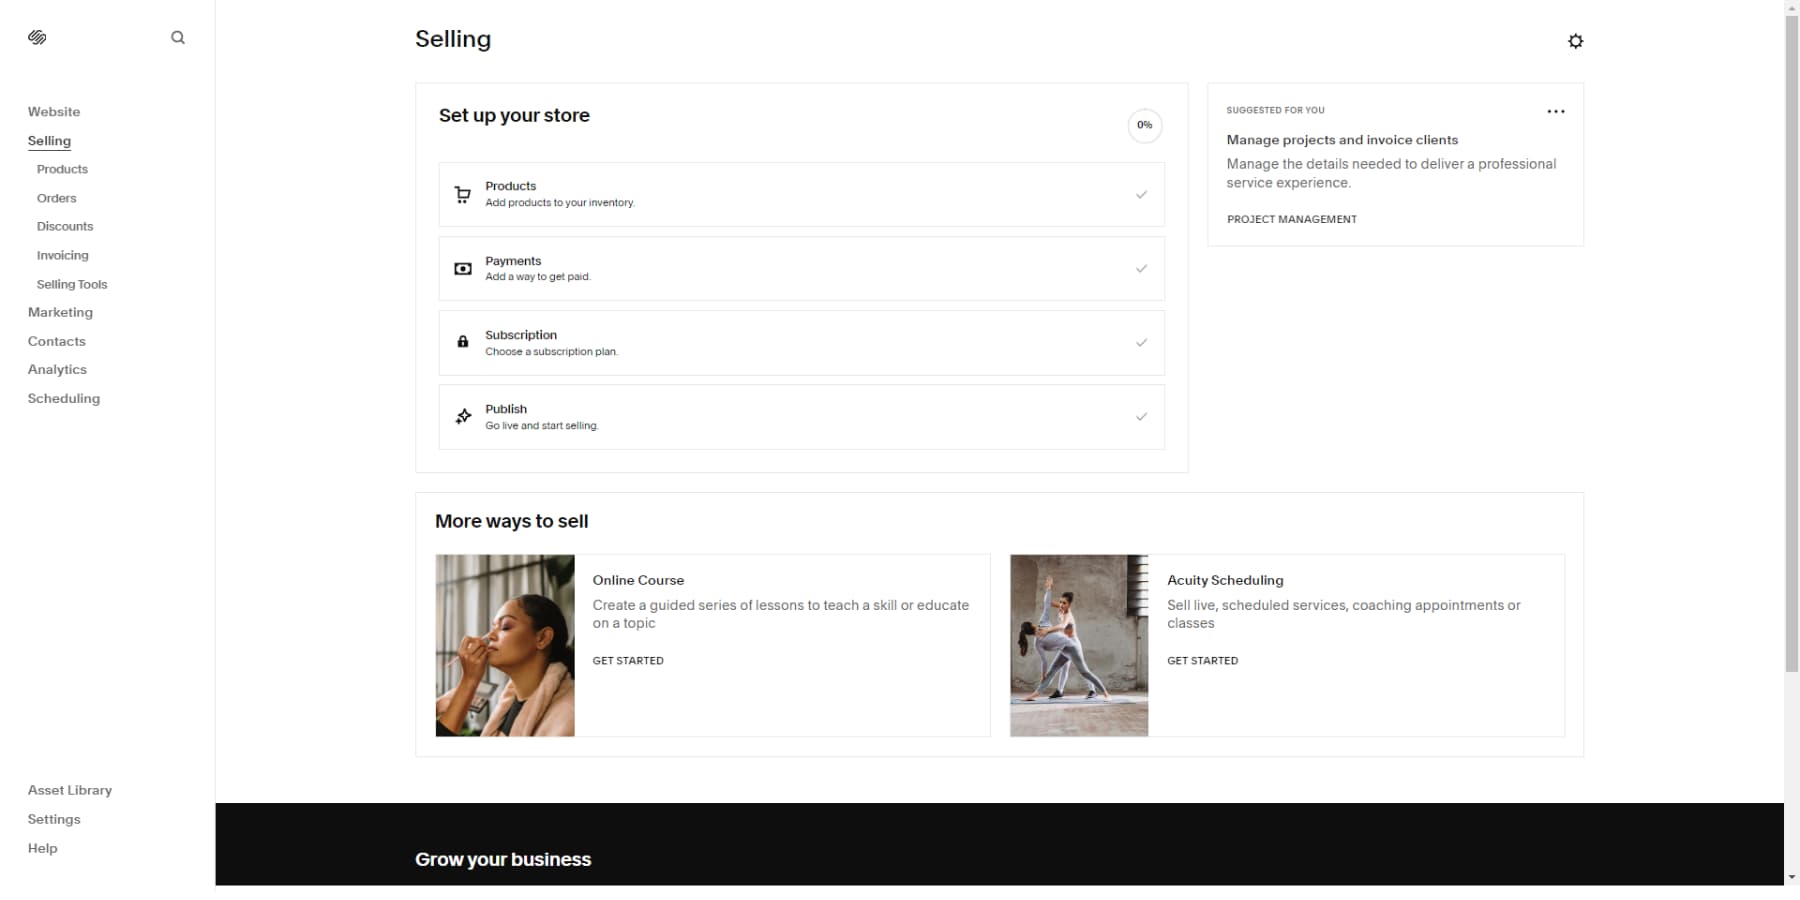 A screenshot of Squarespace's selling options panel